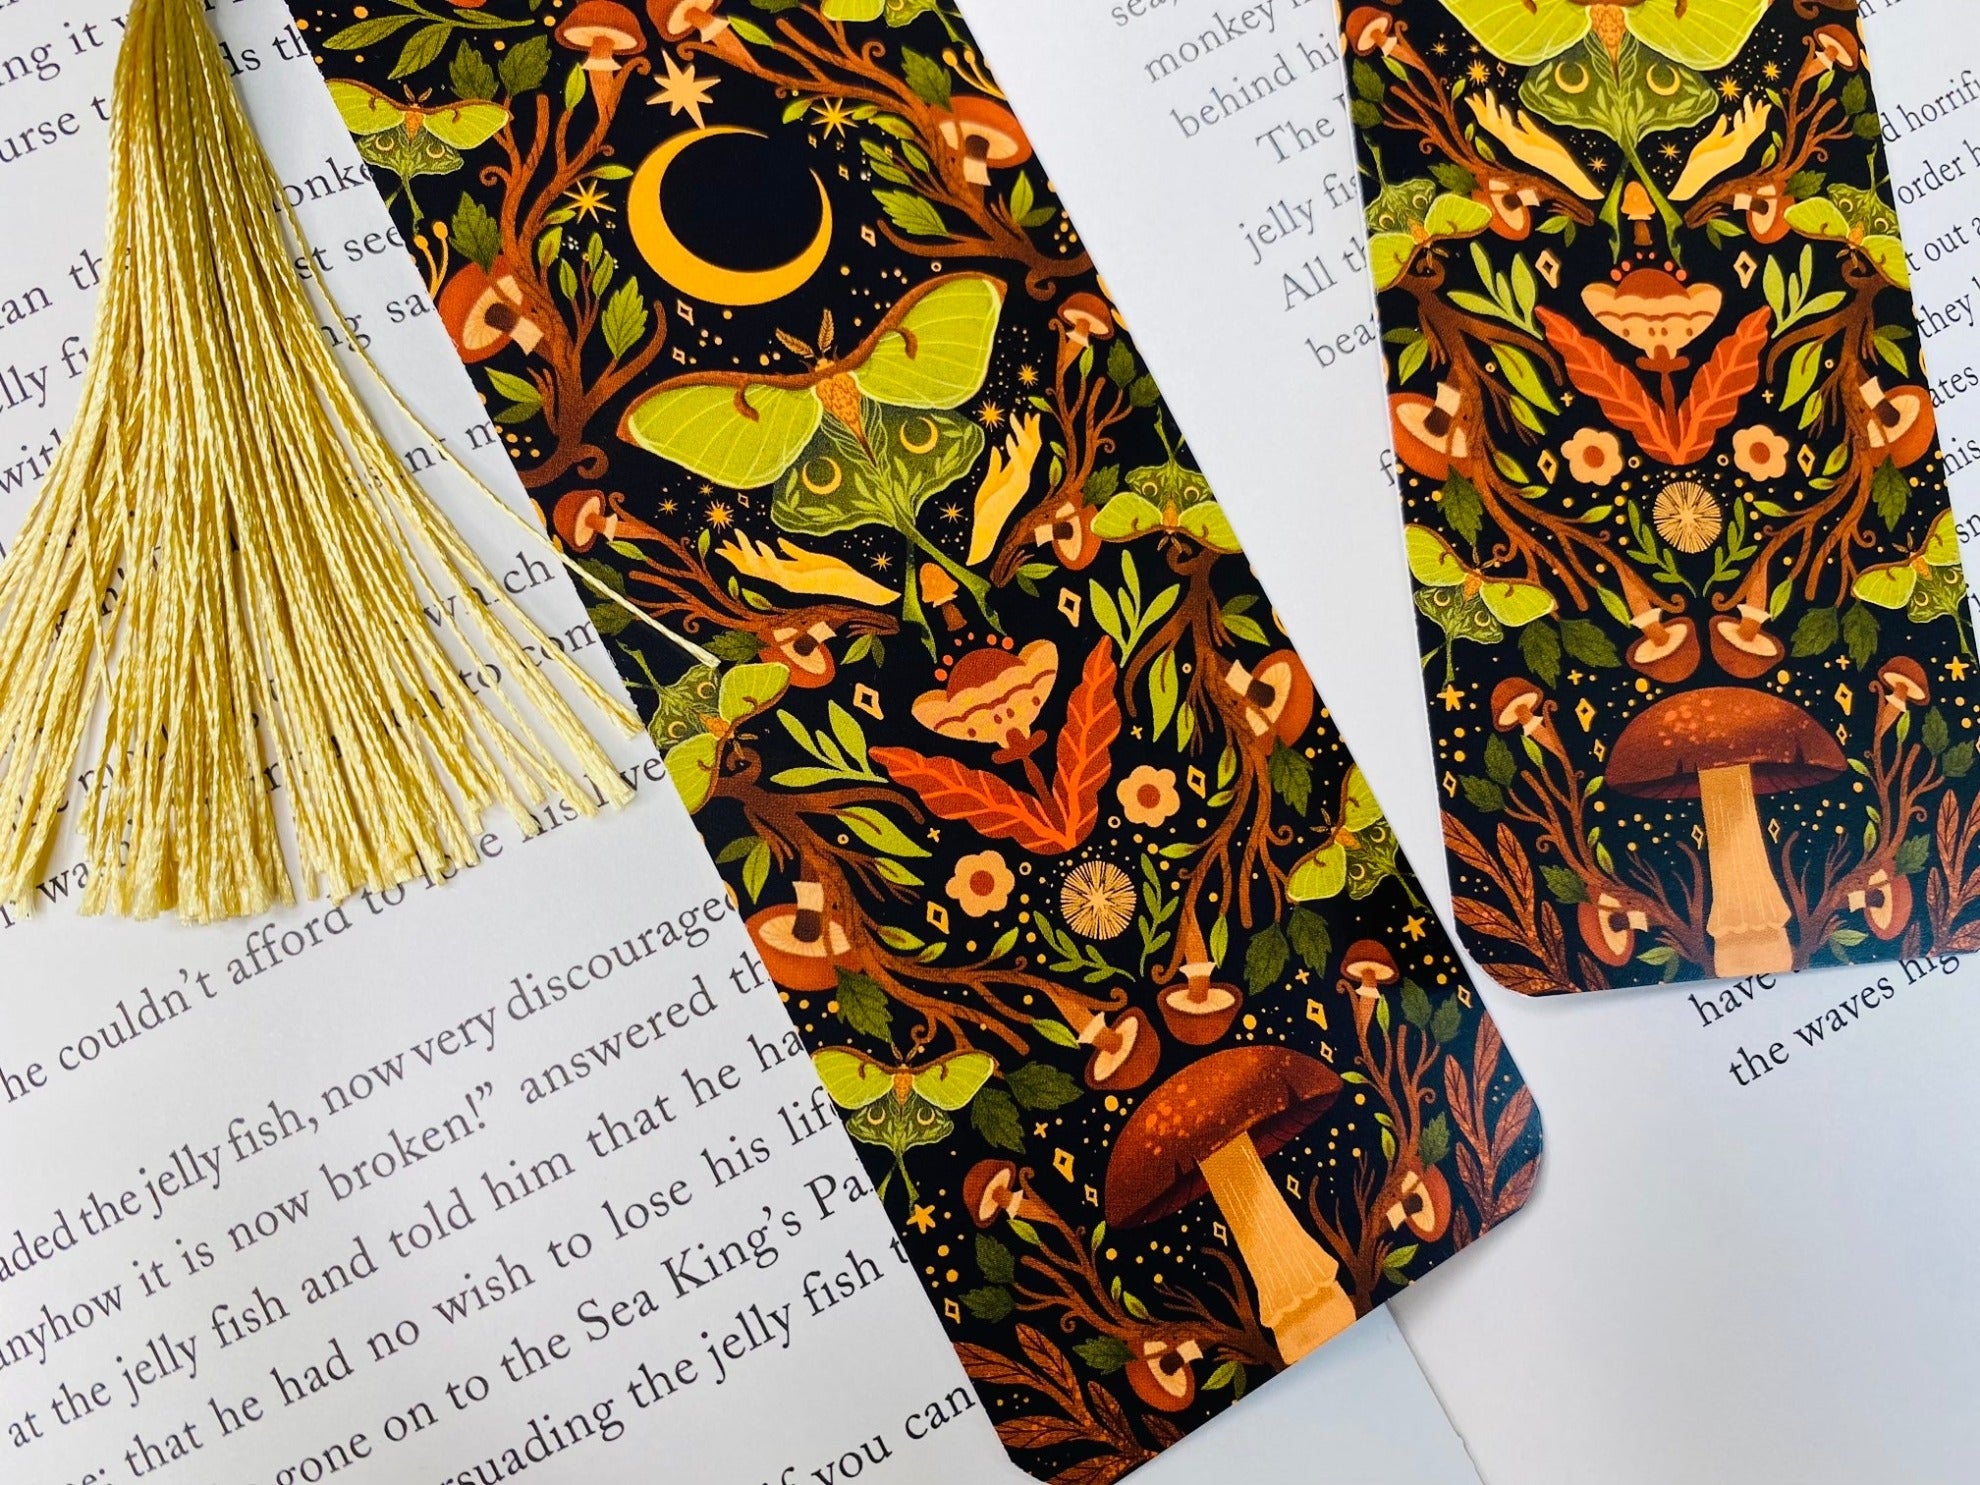 Another Studio / Mushroom Bookmarks — OPEN EDITIONS